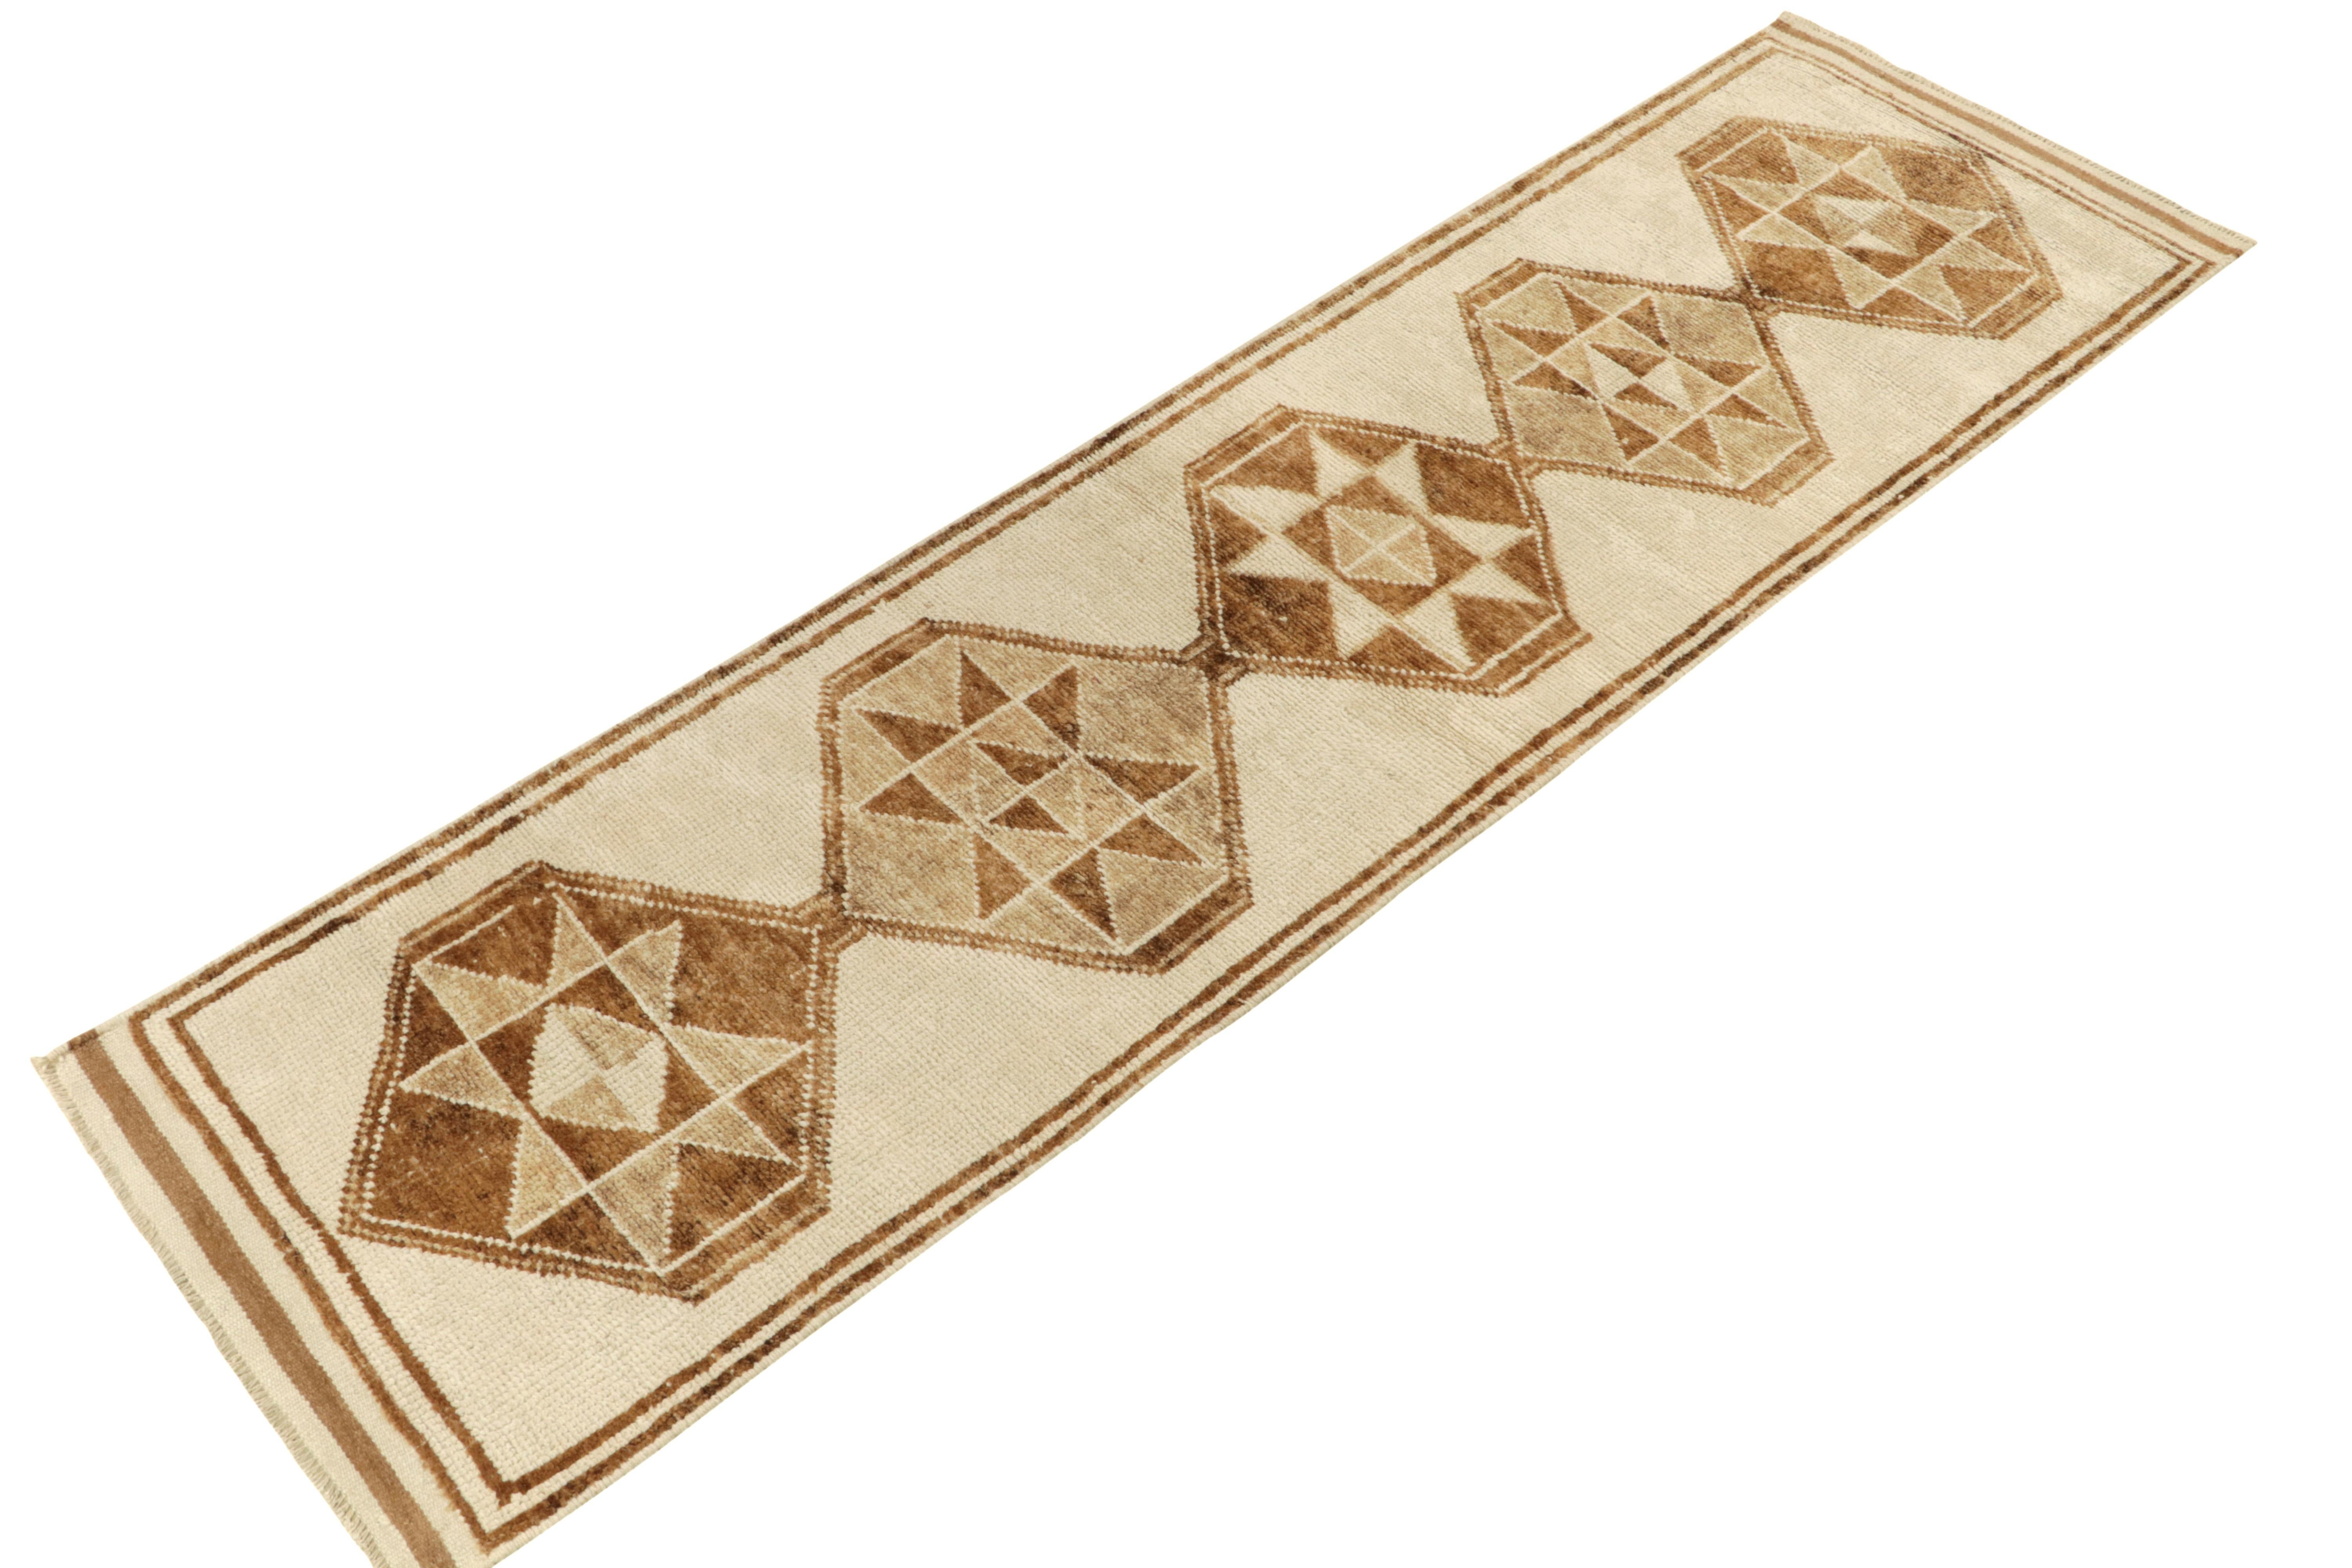 From Rug & Kilim’s vintage selections, a 3x11 hand-knotted wool runner of warm hues and good condition among nomadic rugs. 

This 1950s tribal piece from Turkey showcases traditional motifs sitting confidently like medallions on the field in a